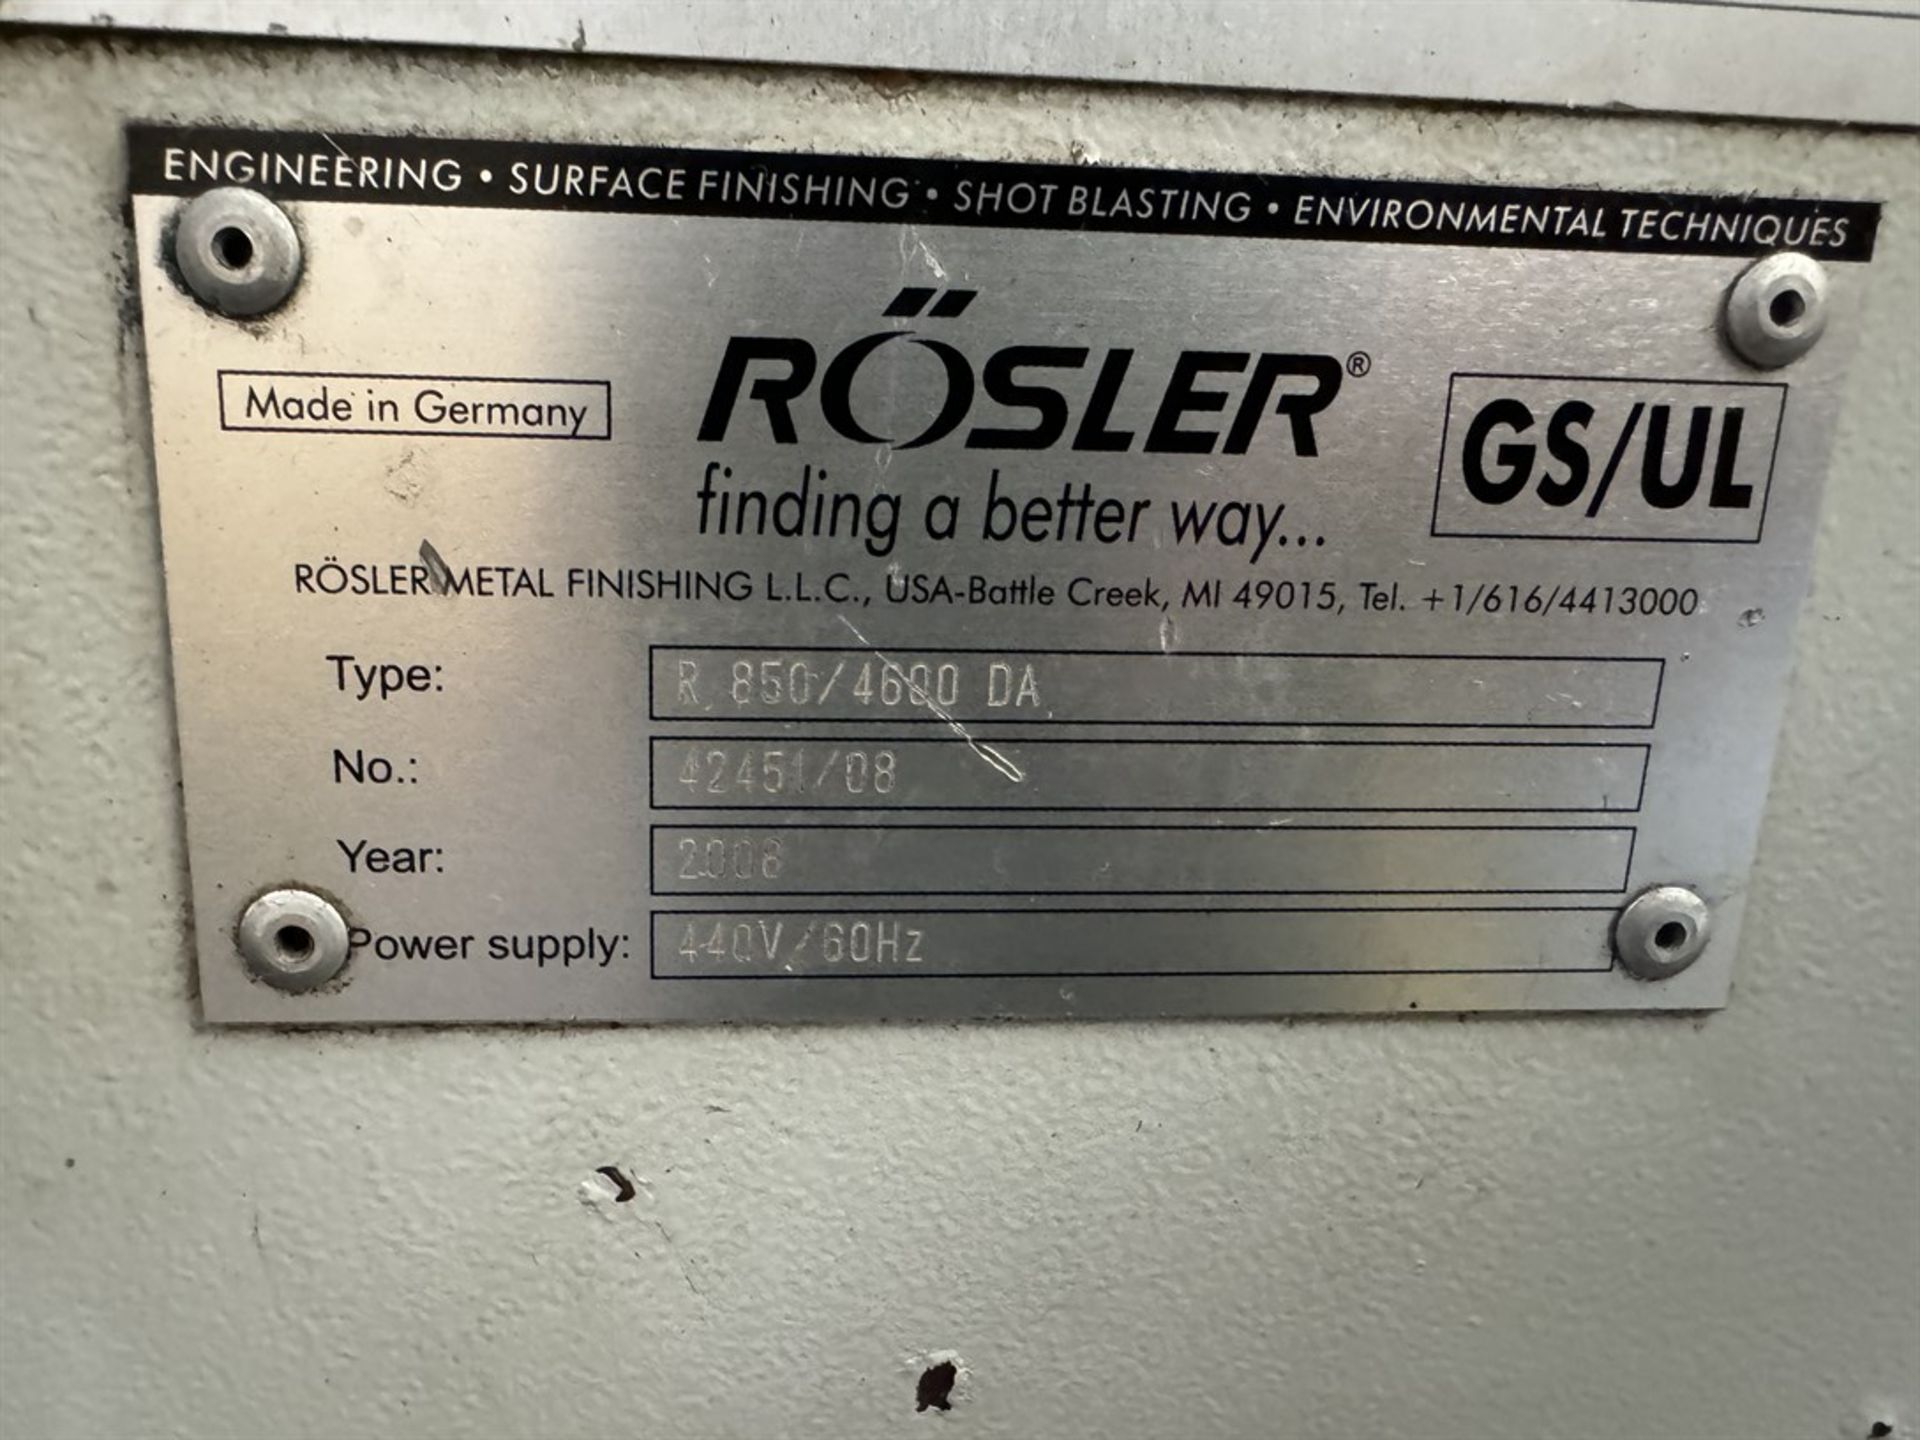 2008 ROSLER R 850/4600 DA Continuous Flow Linear Finisher, s/n 42451/08 - Image 10 of 10